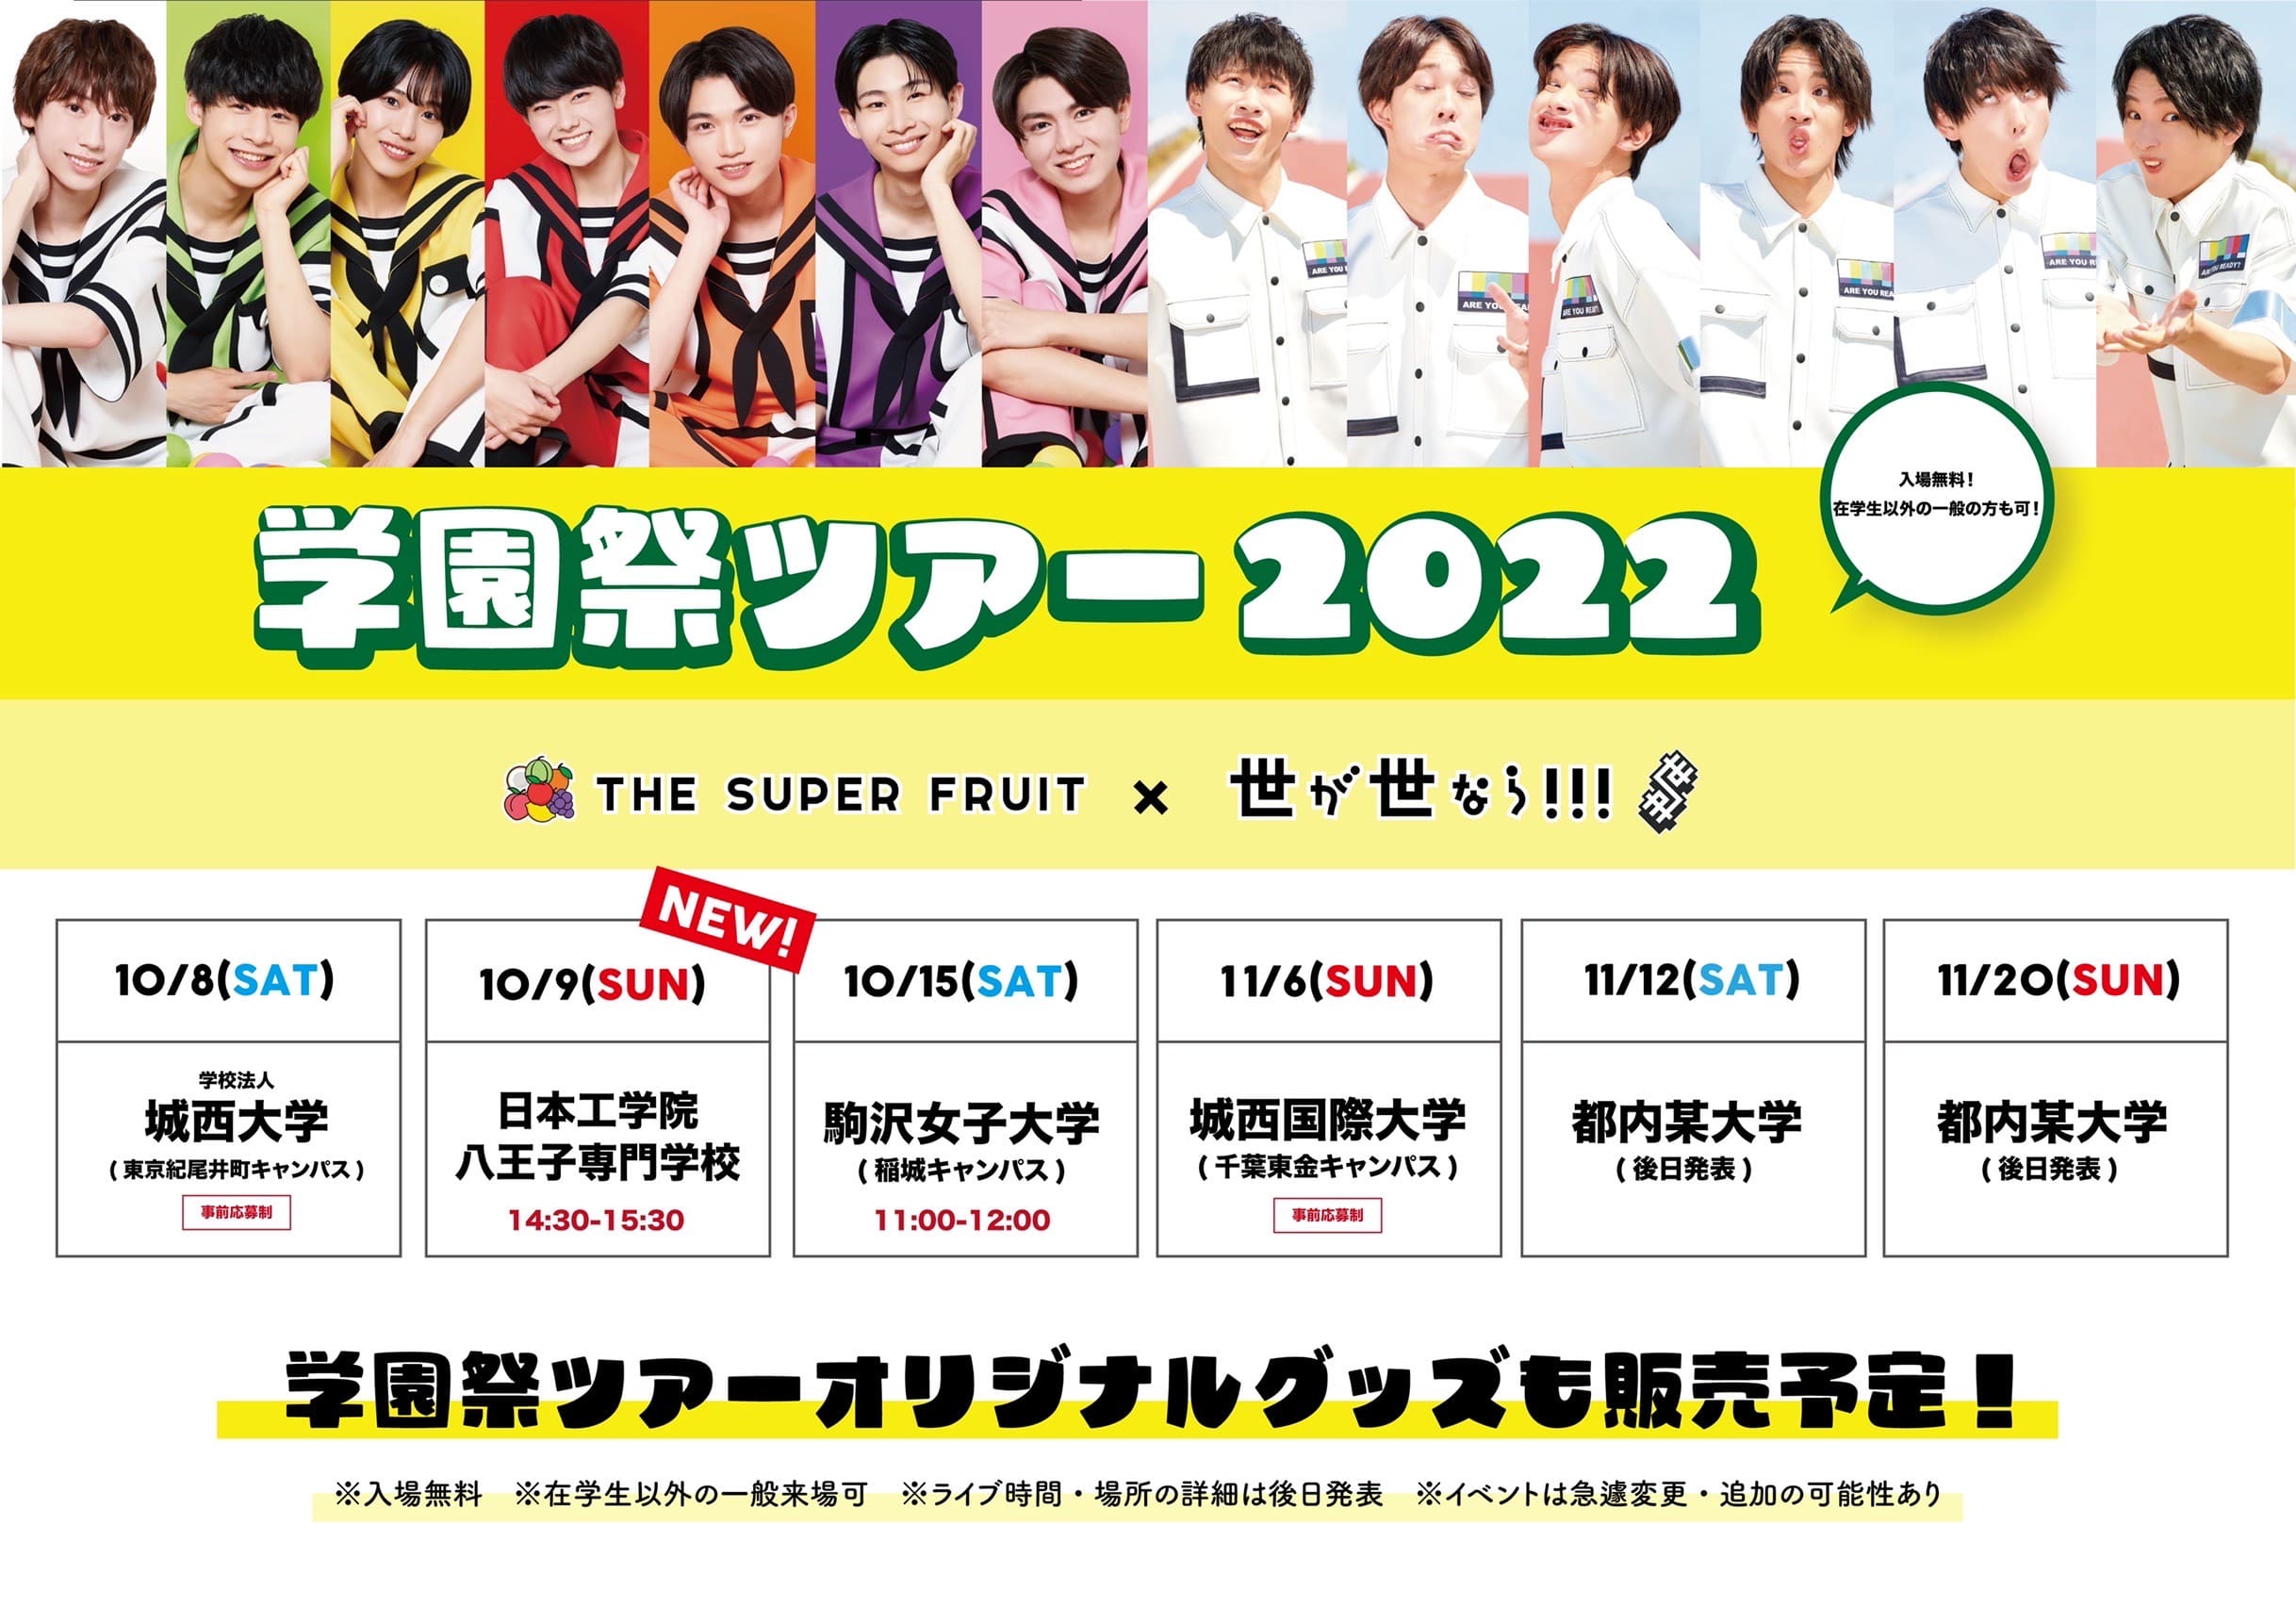 【NEWS】「THE SUPER FRUIT × 世が世なら!!! 学園祭ツアー2022」追加情報解禁！